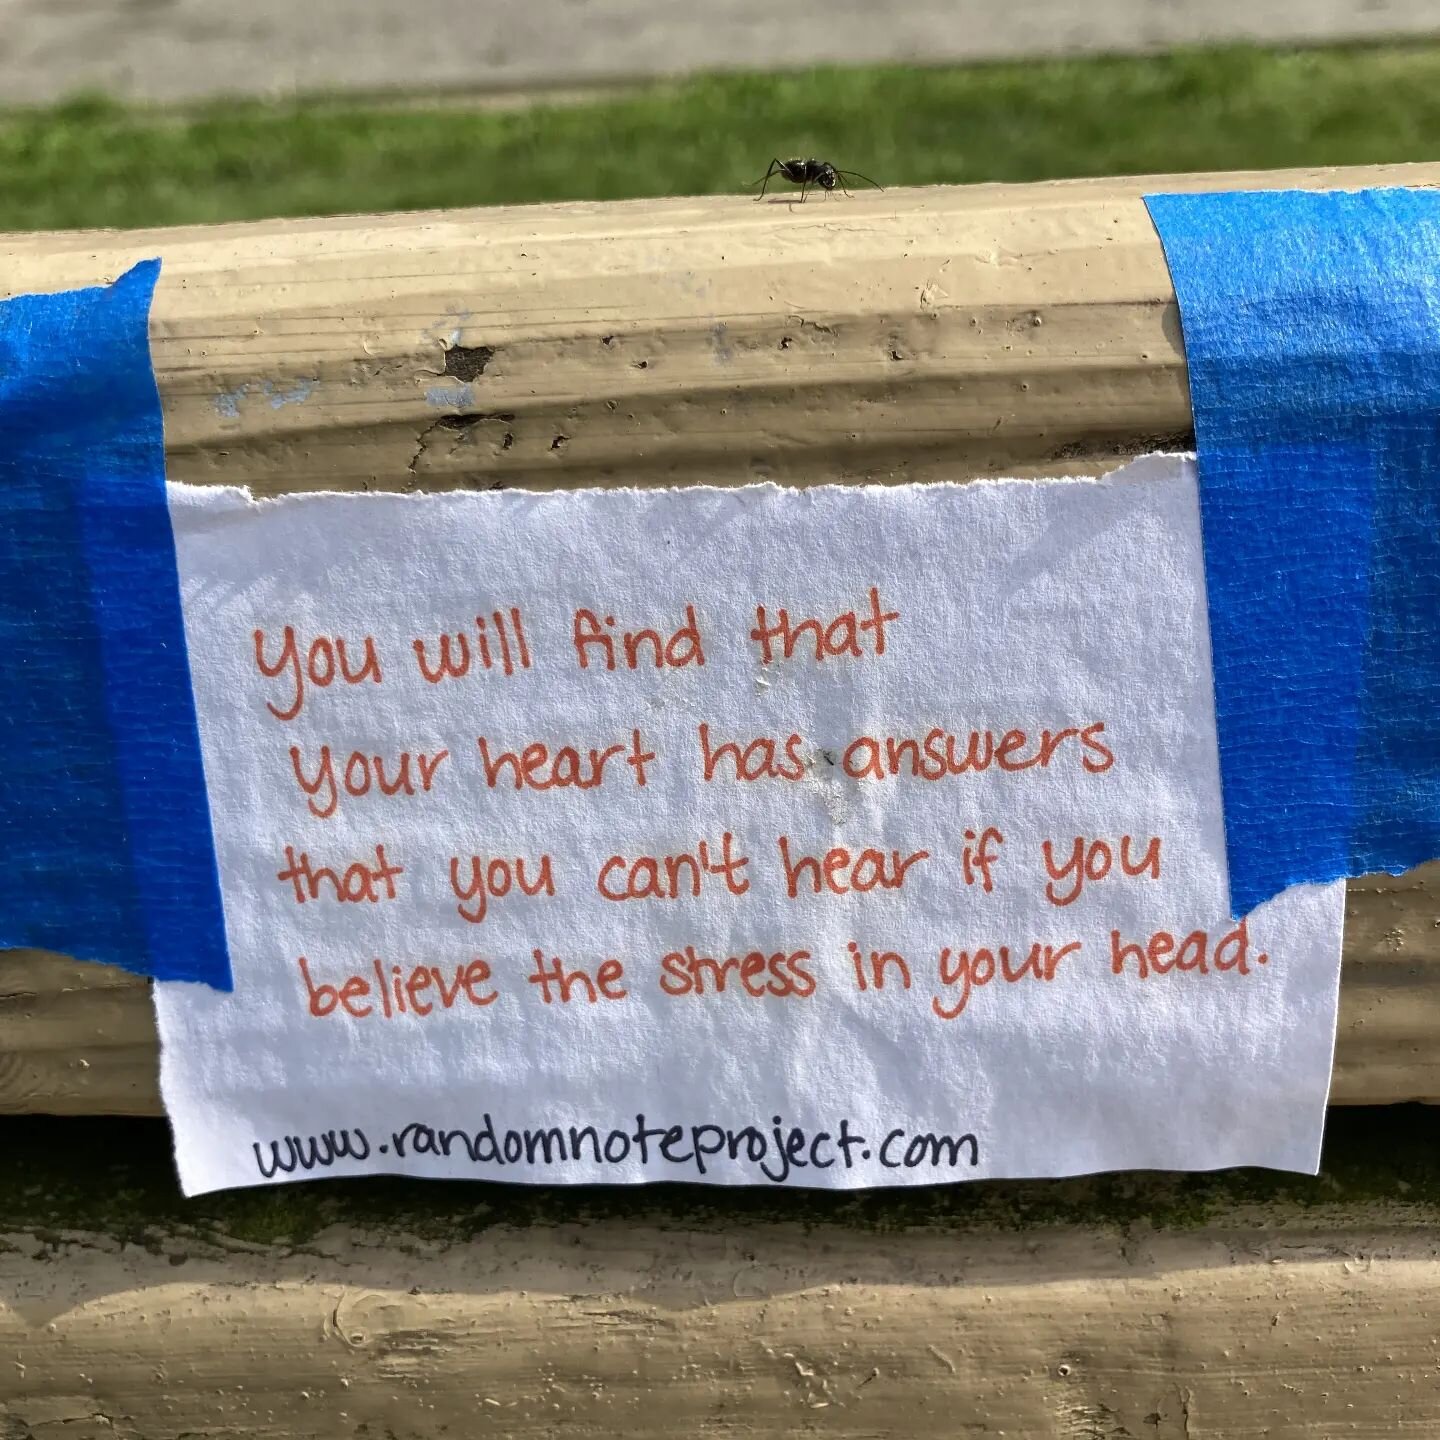 Colleen found a note in Friendship Park, Pittsburgh, PA, USA and writes, &quot;The words resonated with me and hit a nerve because stress/anxiety/fear inhibit problem-solving efforts and often block the heart&rsquo;s desire.&quot;

The note said, &qu